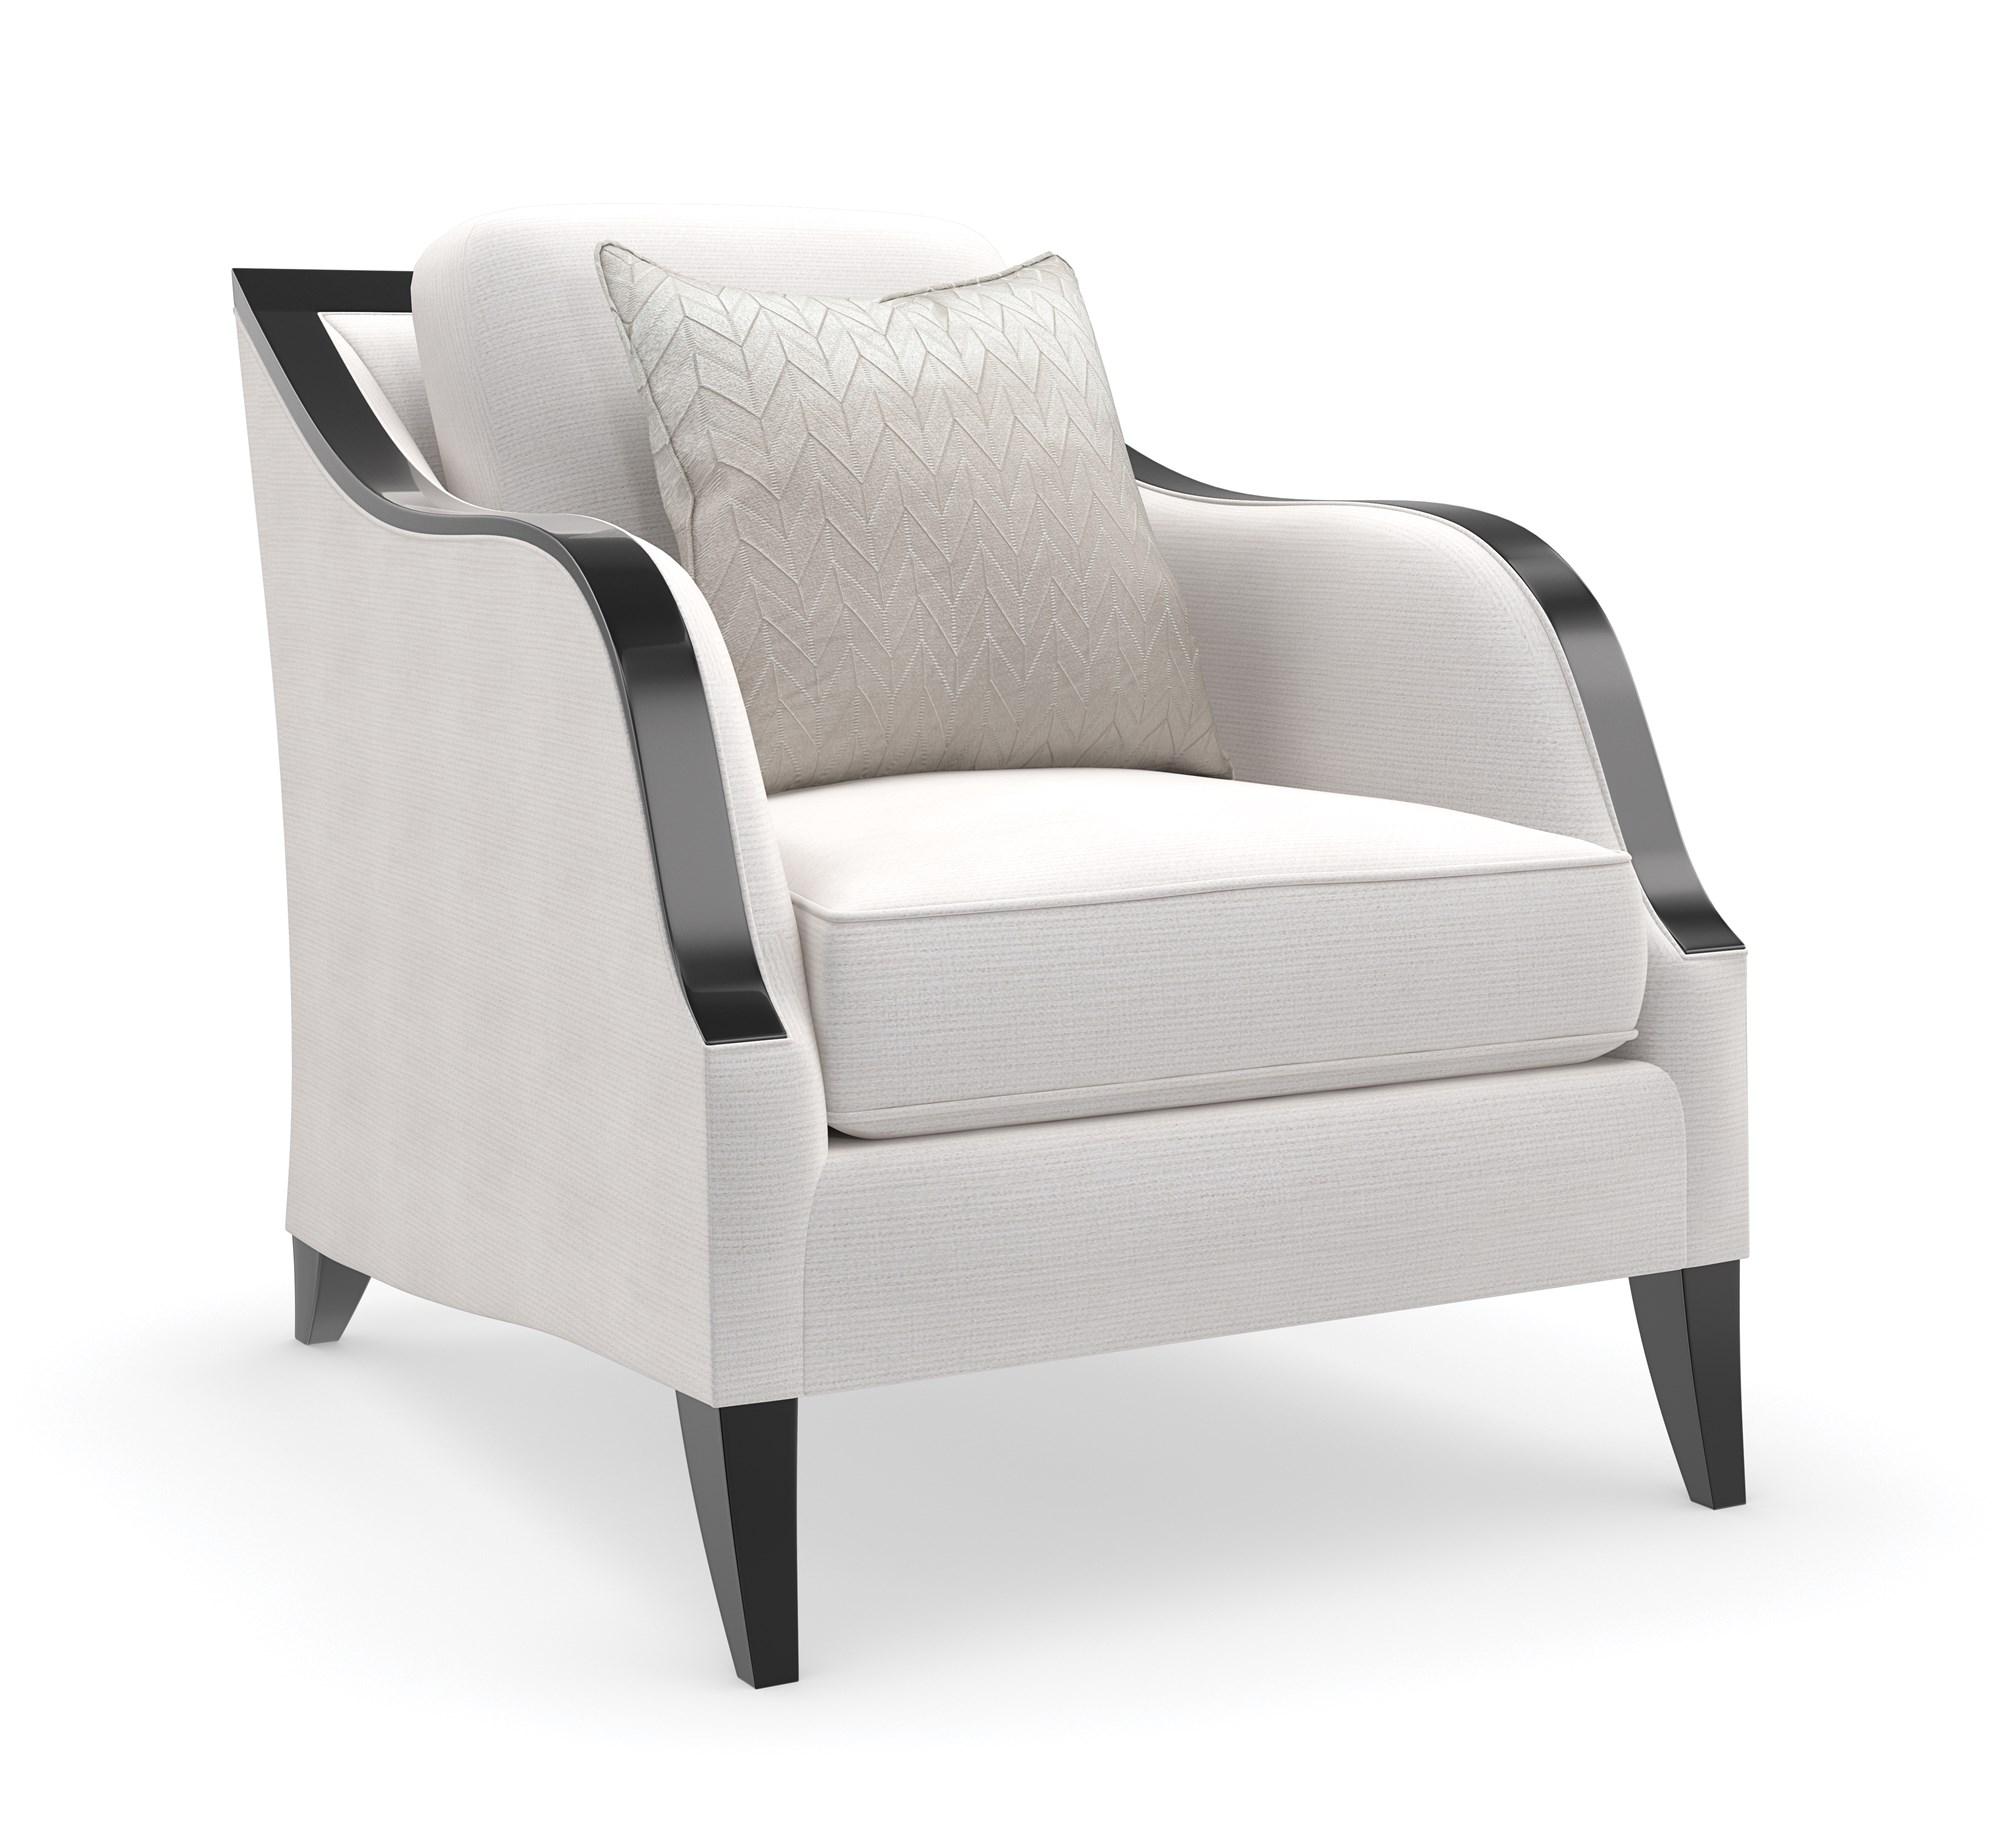 Contemporary Armchair PITCH PERFECT CHAIR UPH-422-131-A in Cream Fabric